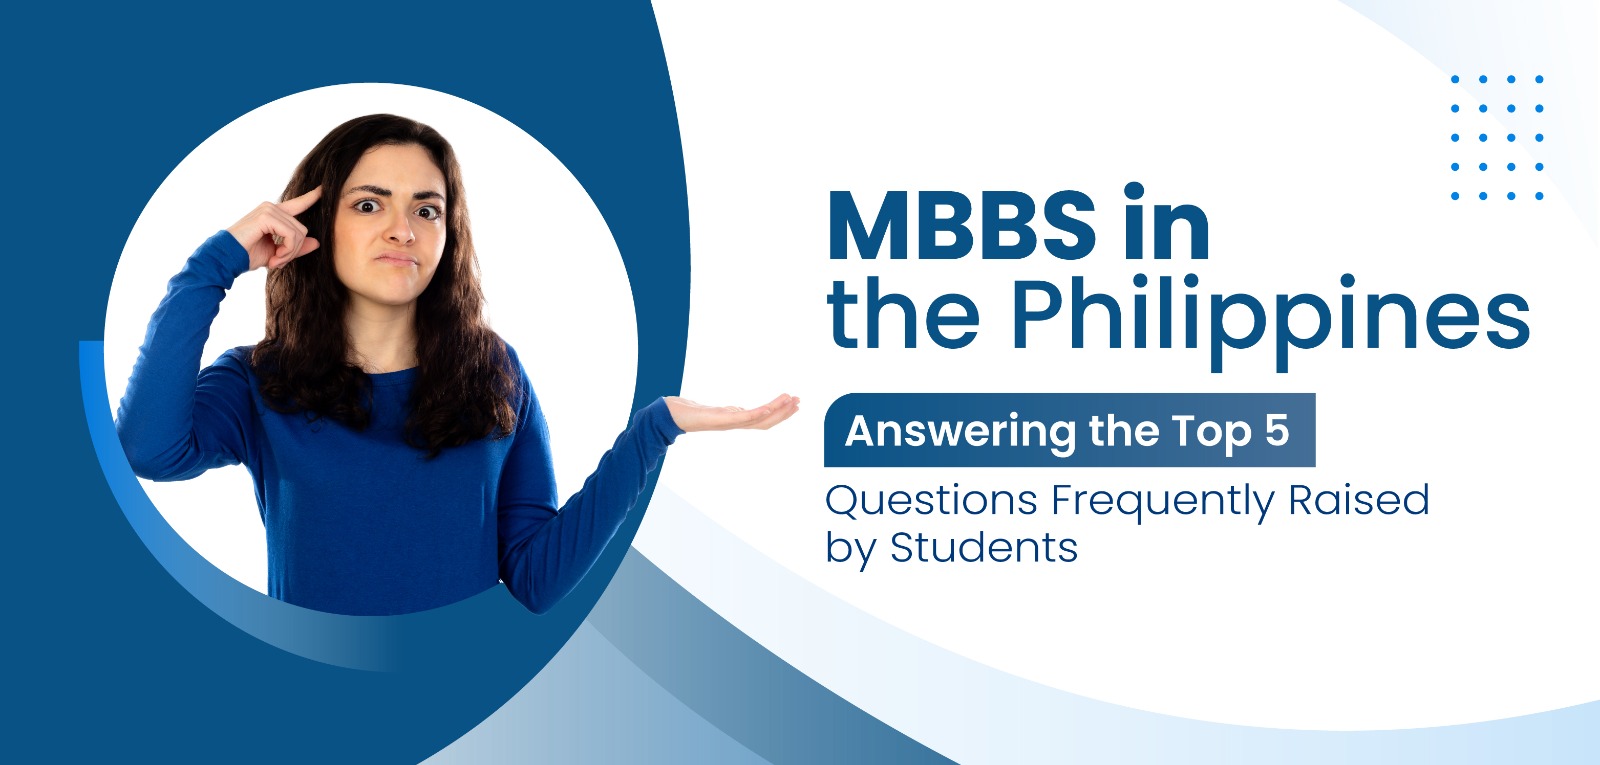 MBBS in the Philippines: Answering the Top 5 Questions Frequently Raised by Students